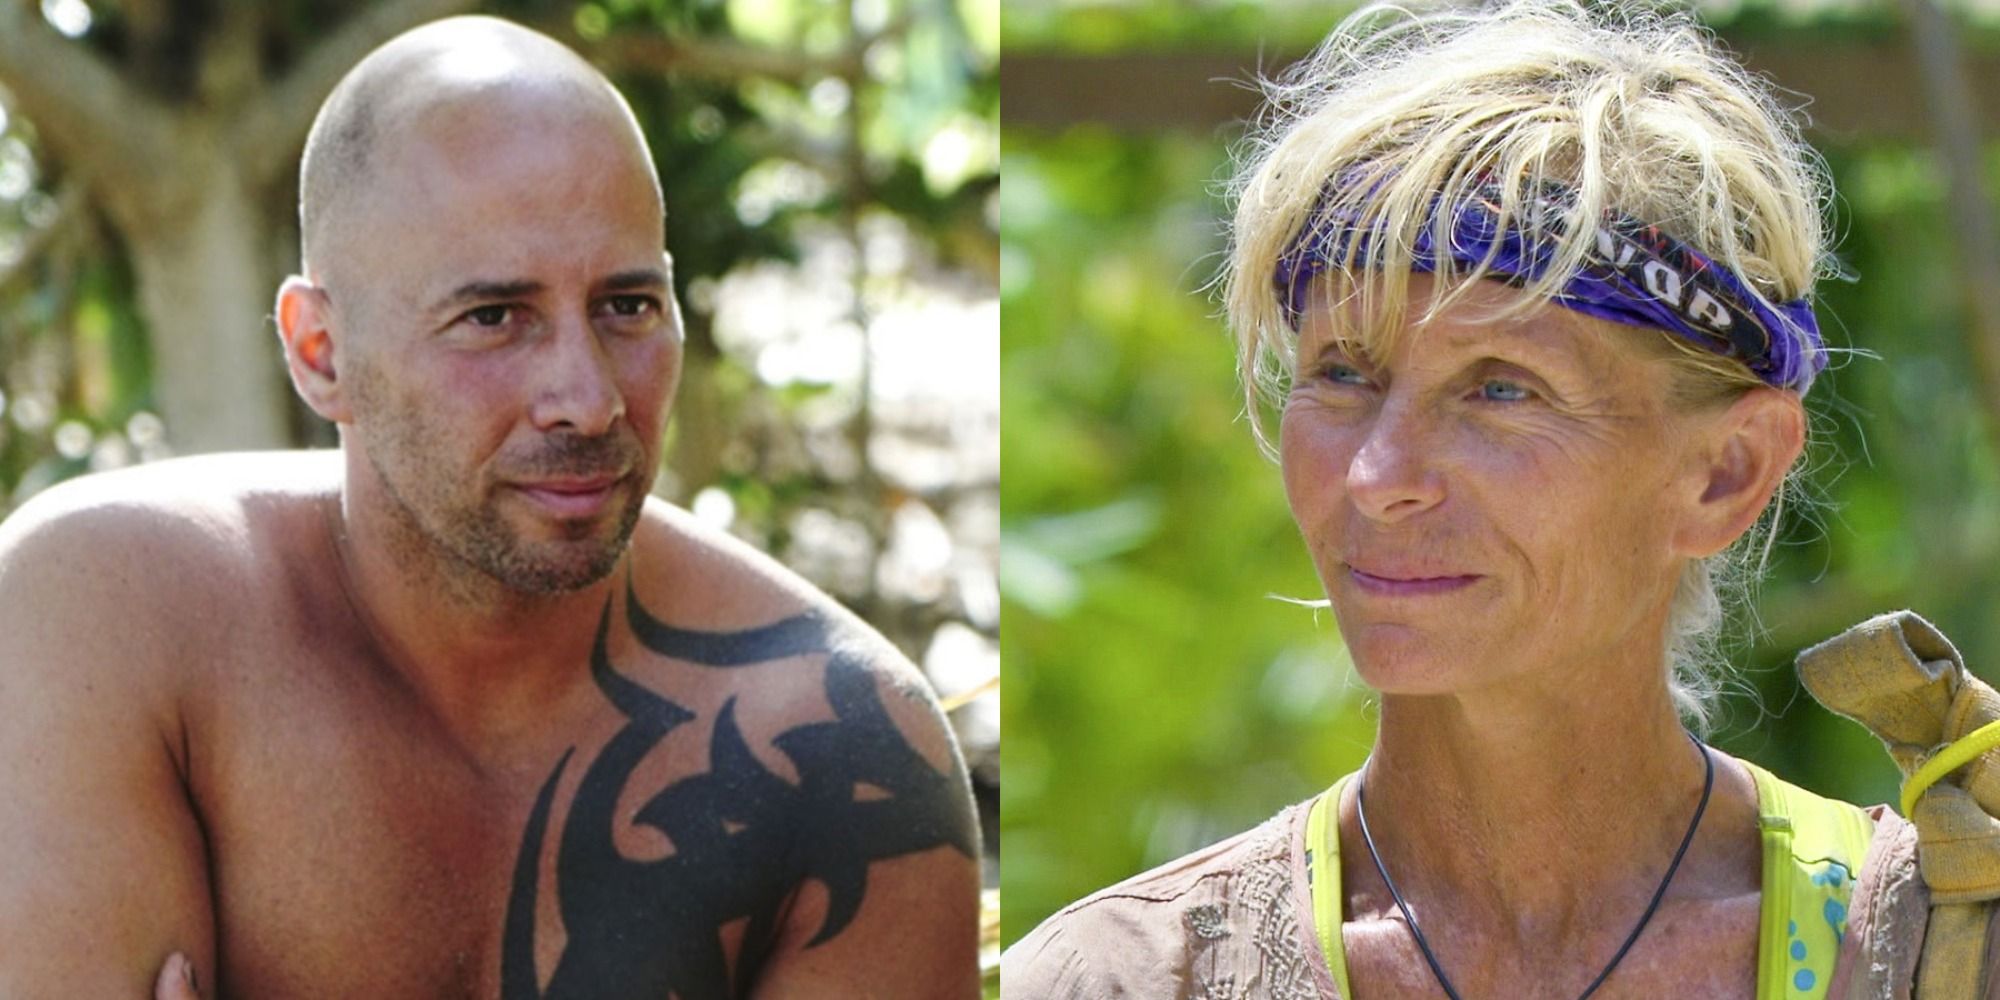 Split image of Tony Vlachos and Tina Wesson from Survivor